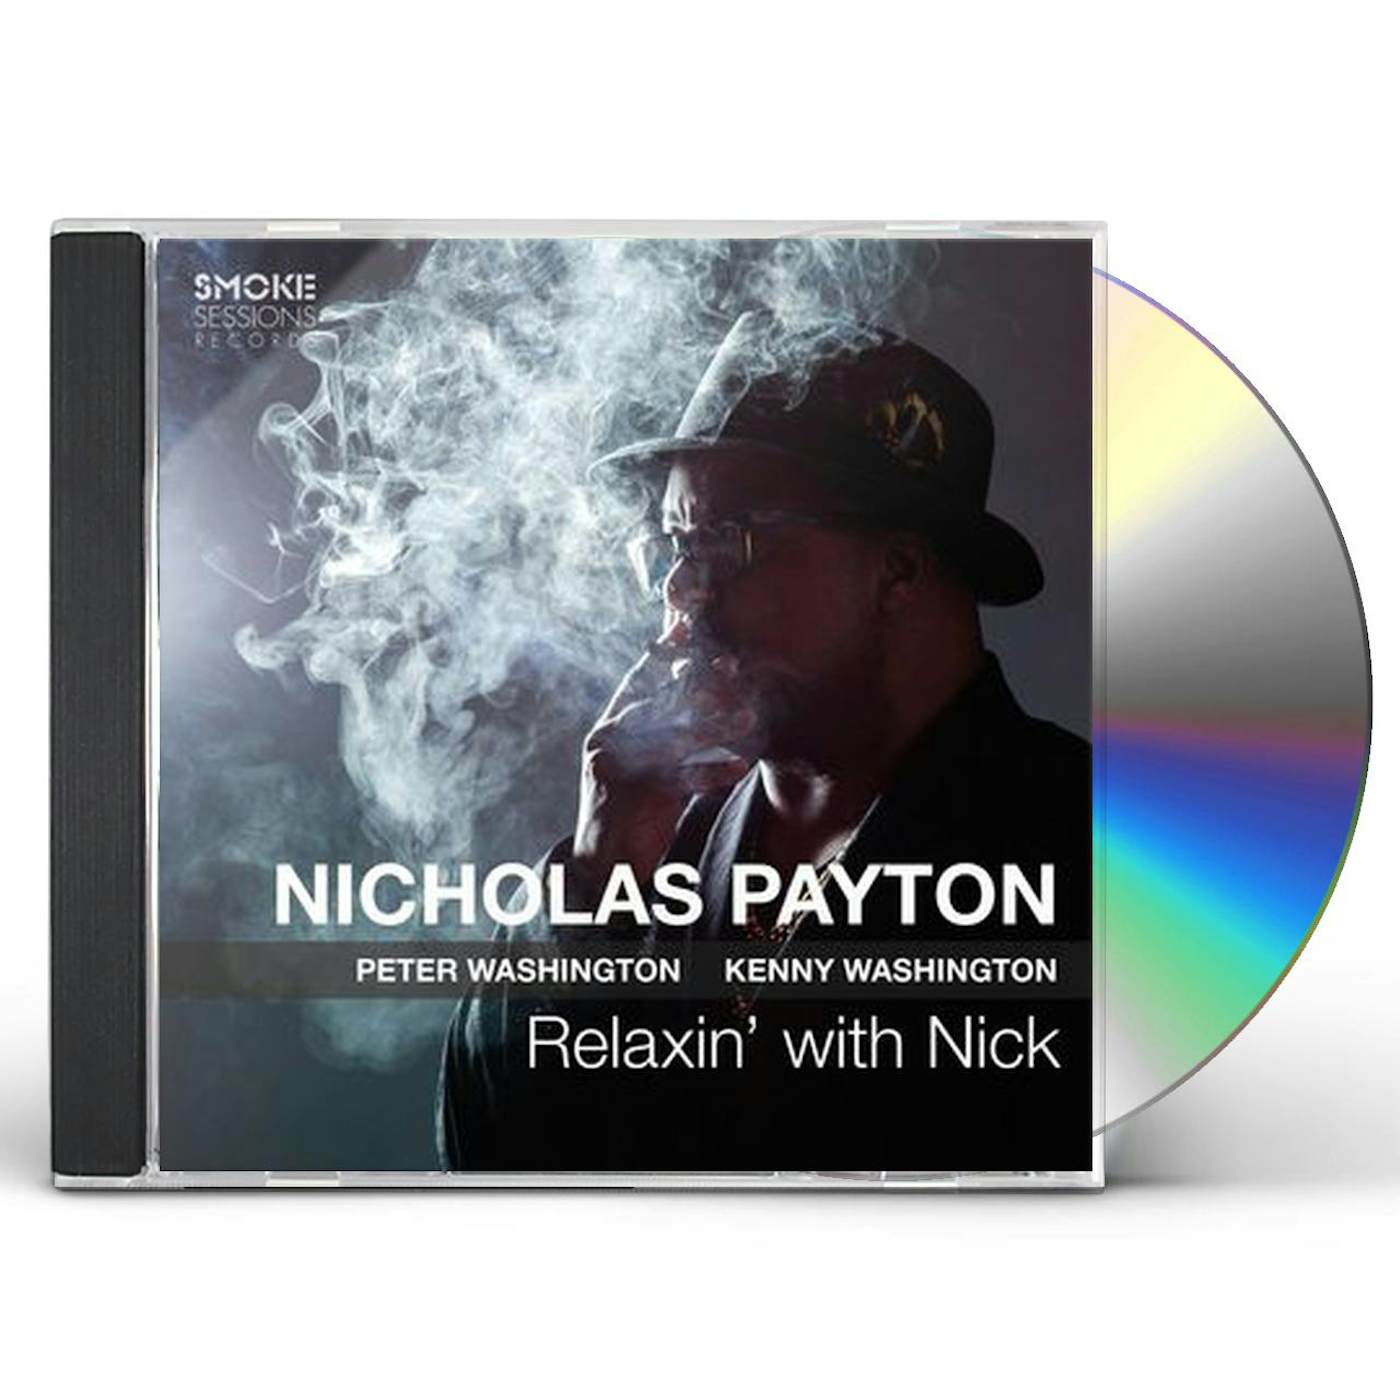 Nicholas Payton RELAXIN' WITH NICK CD